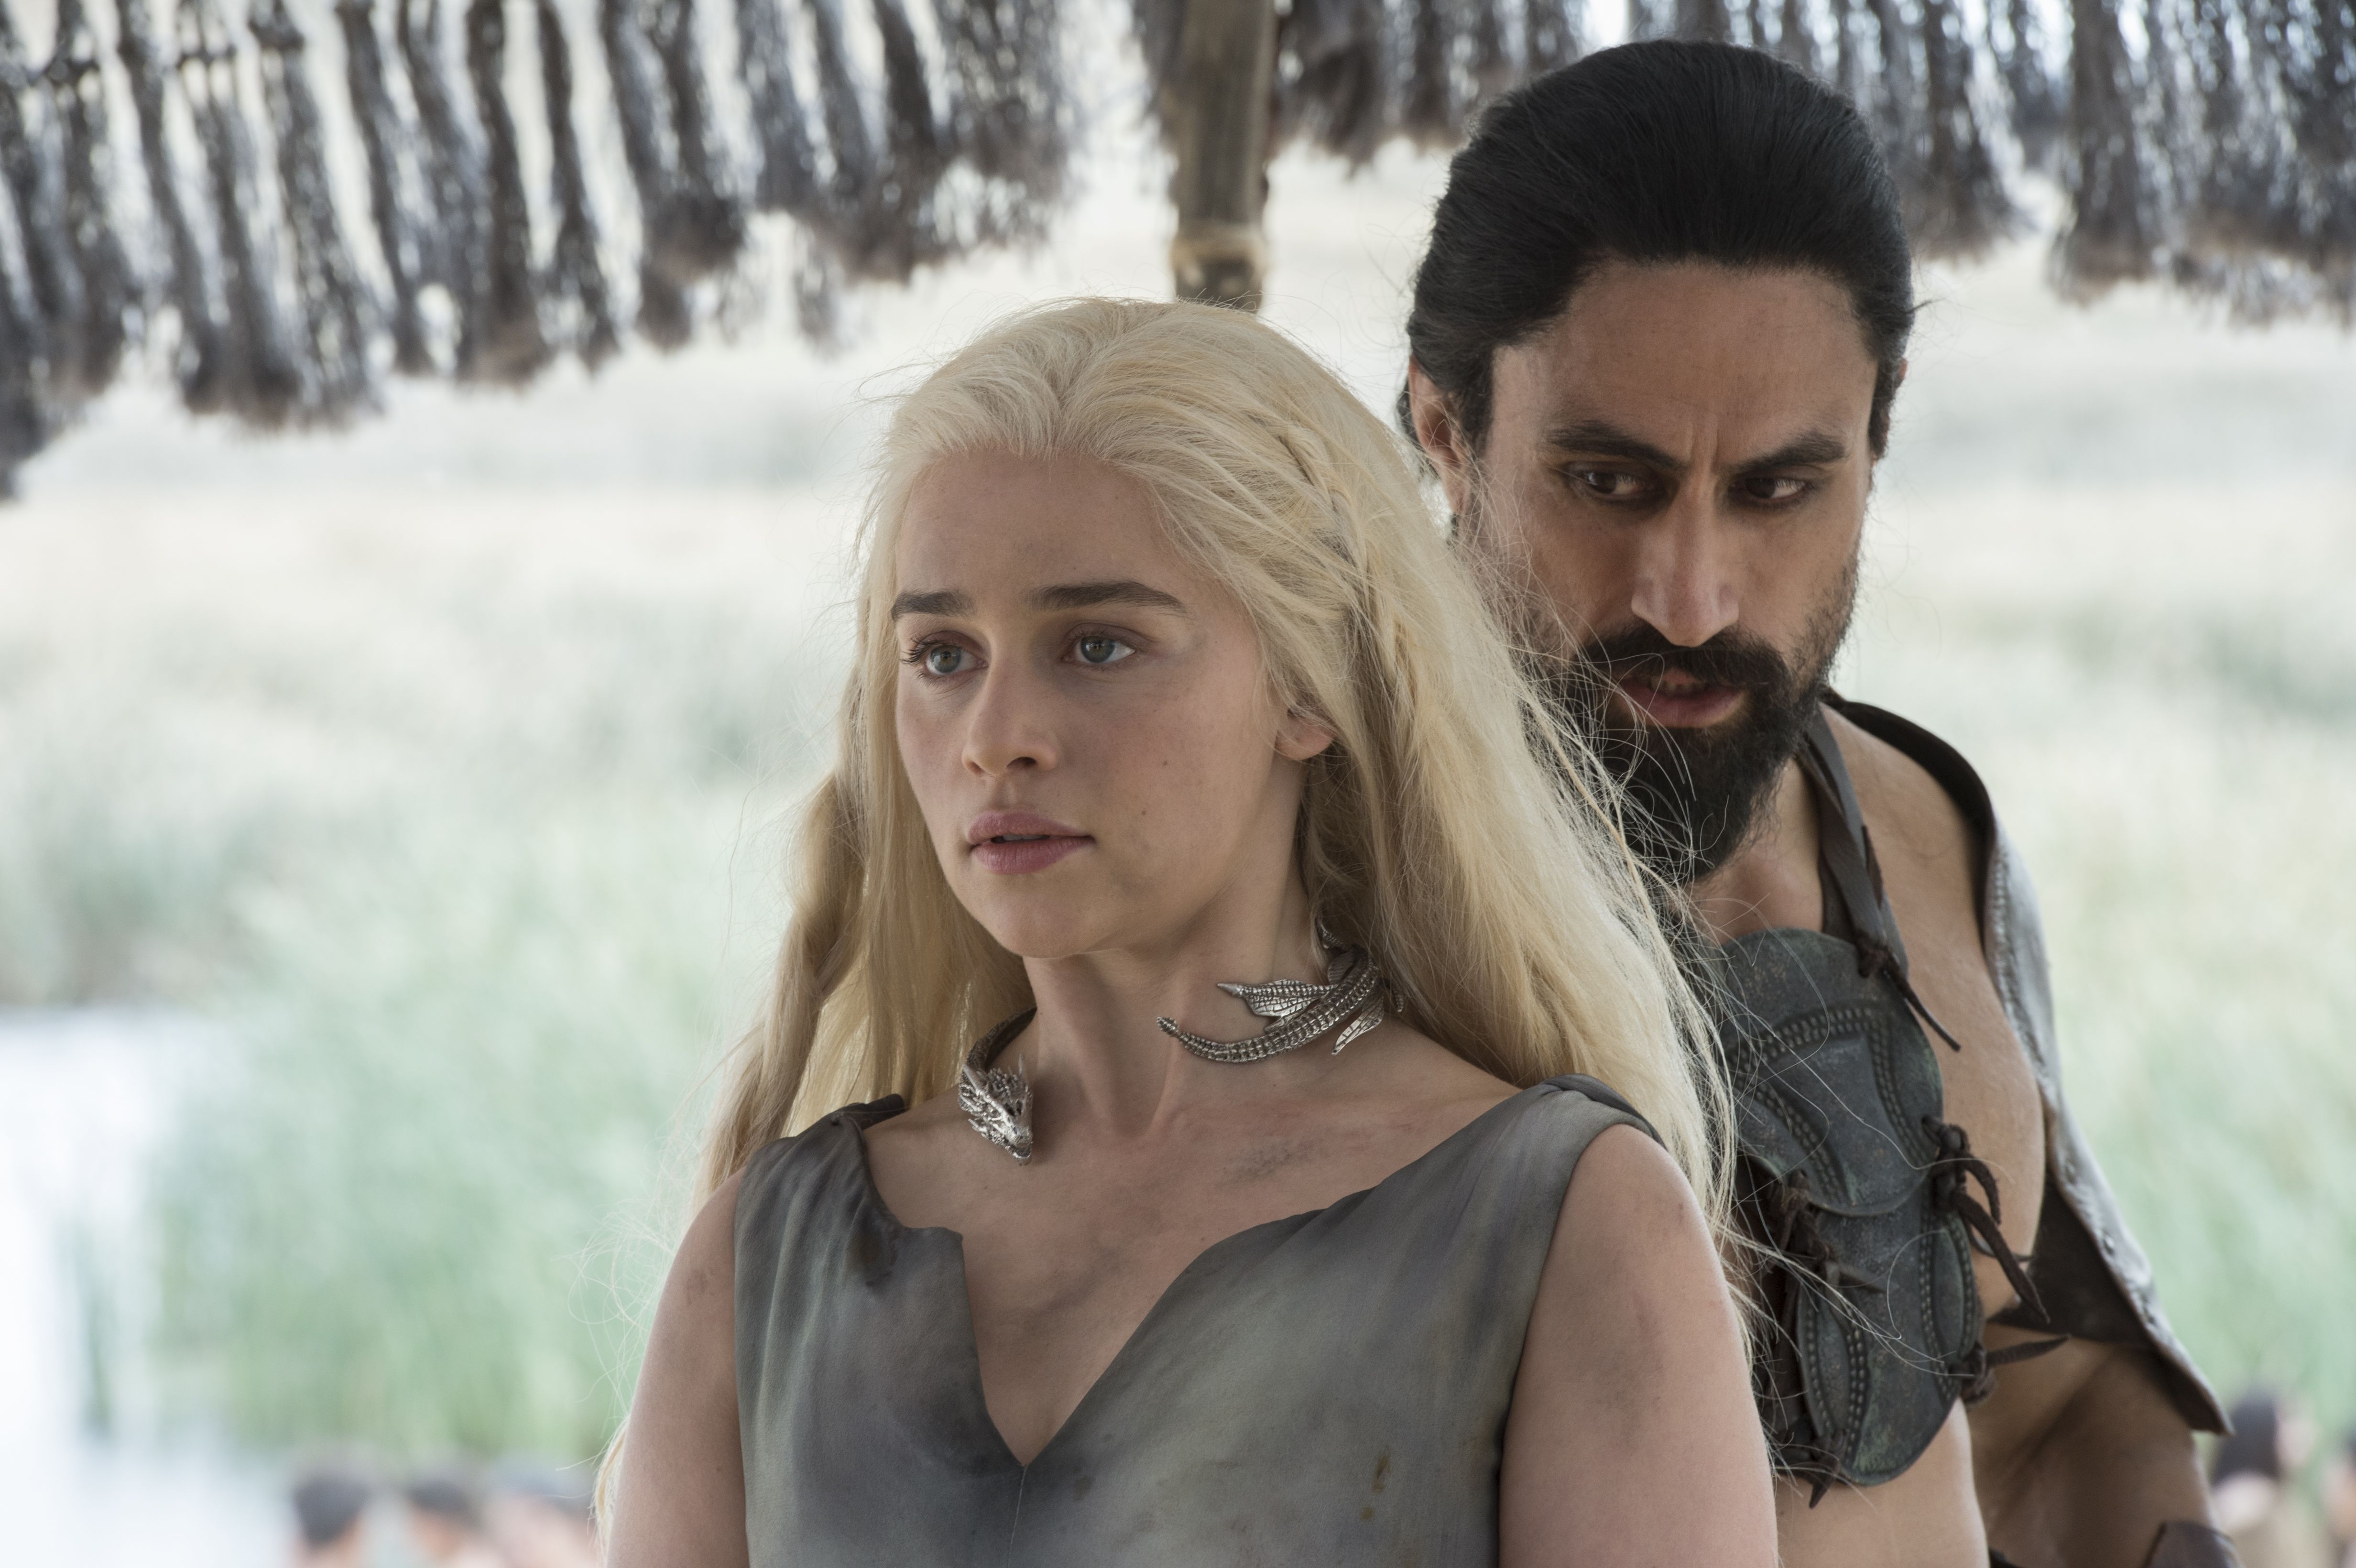 FIRST WATCH: “Game of Thrones” Season 1, Episode 1 “Winter is